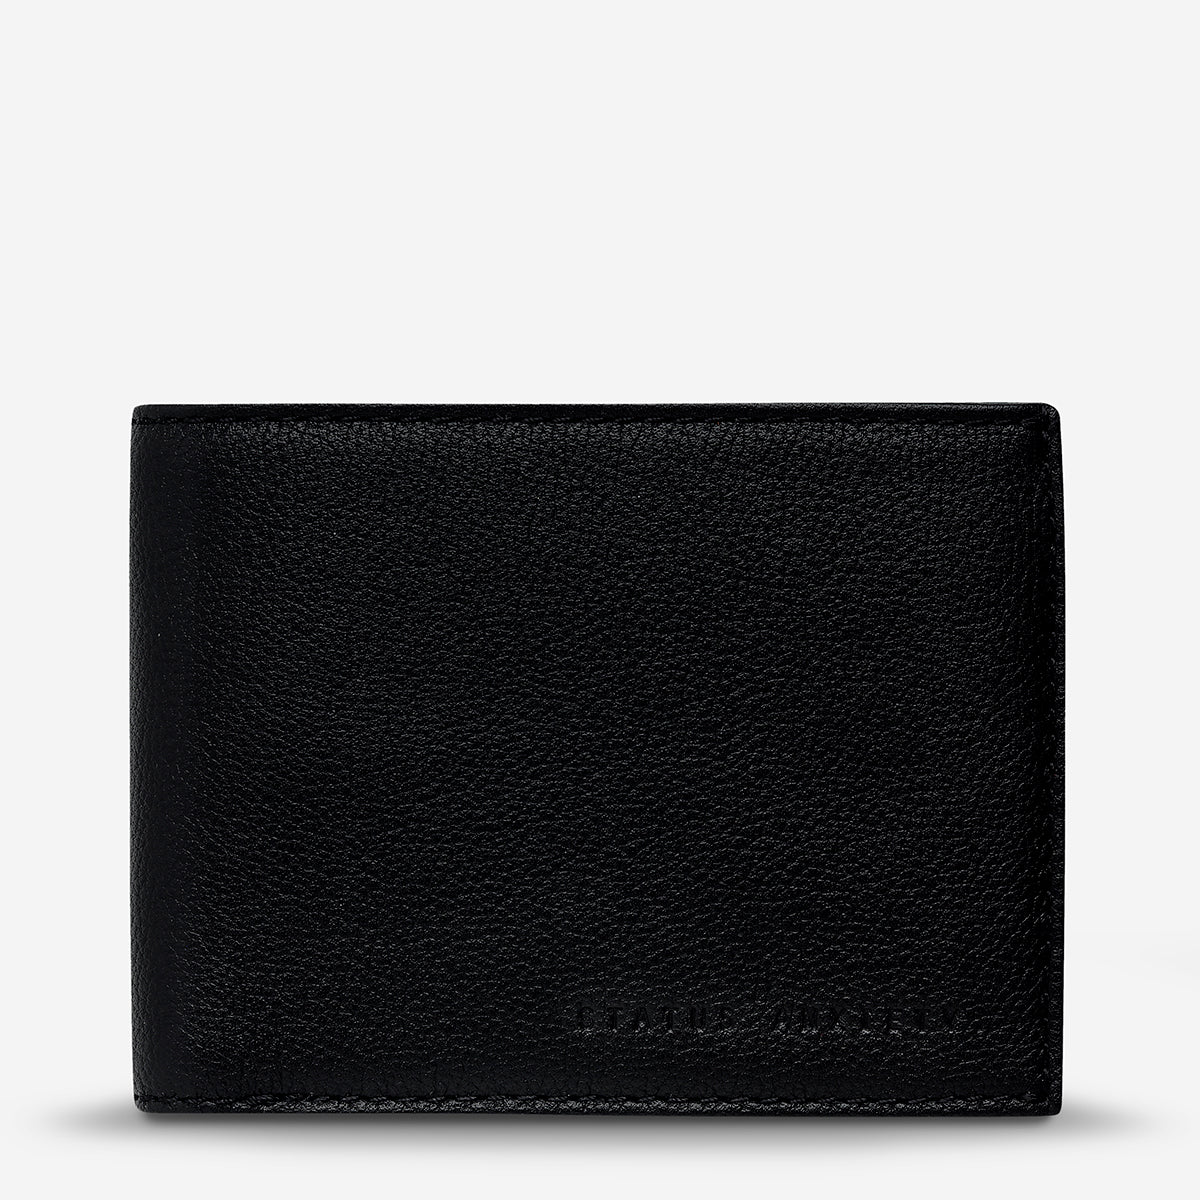 Men's Genuine Leather Goods | Status Anxiety® | Free Shipping